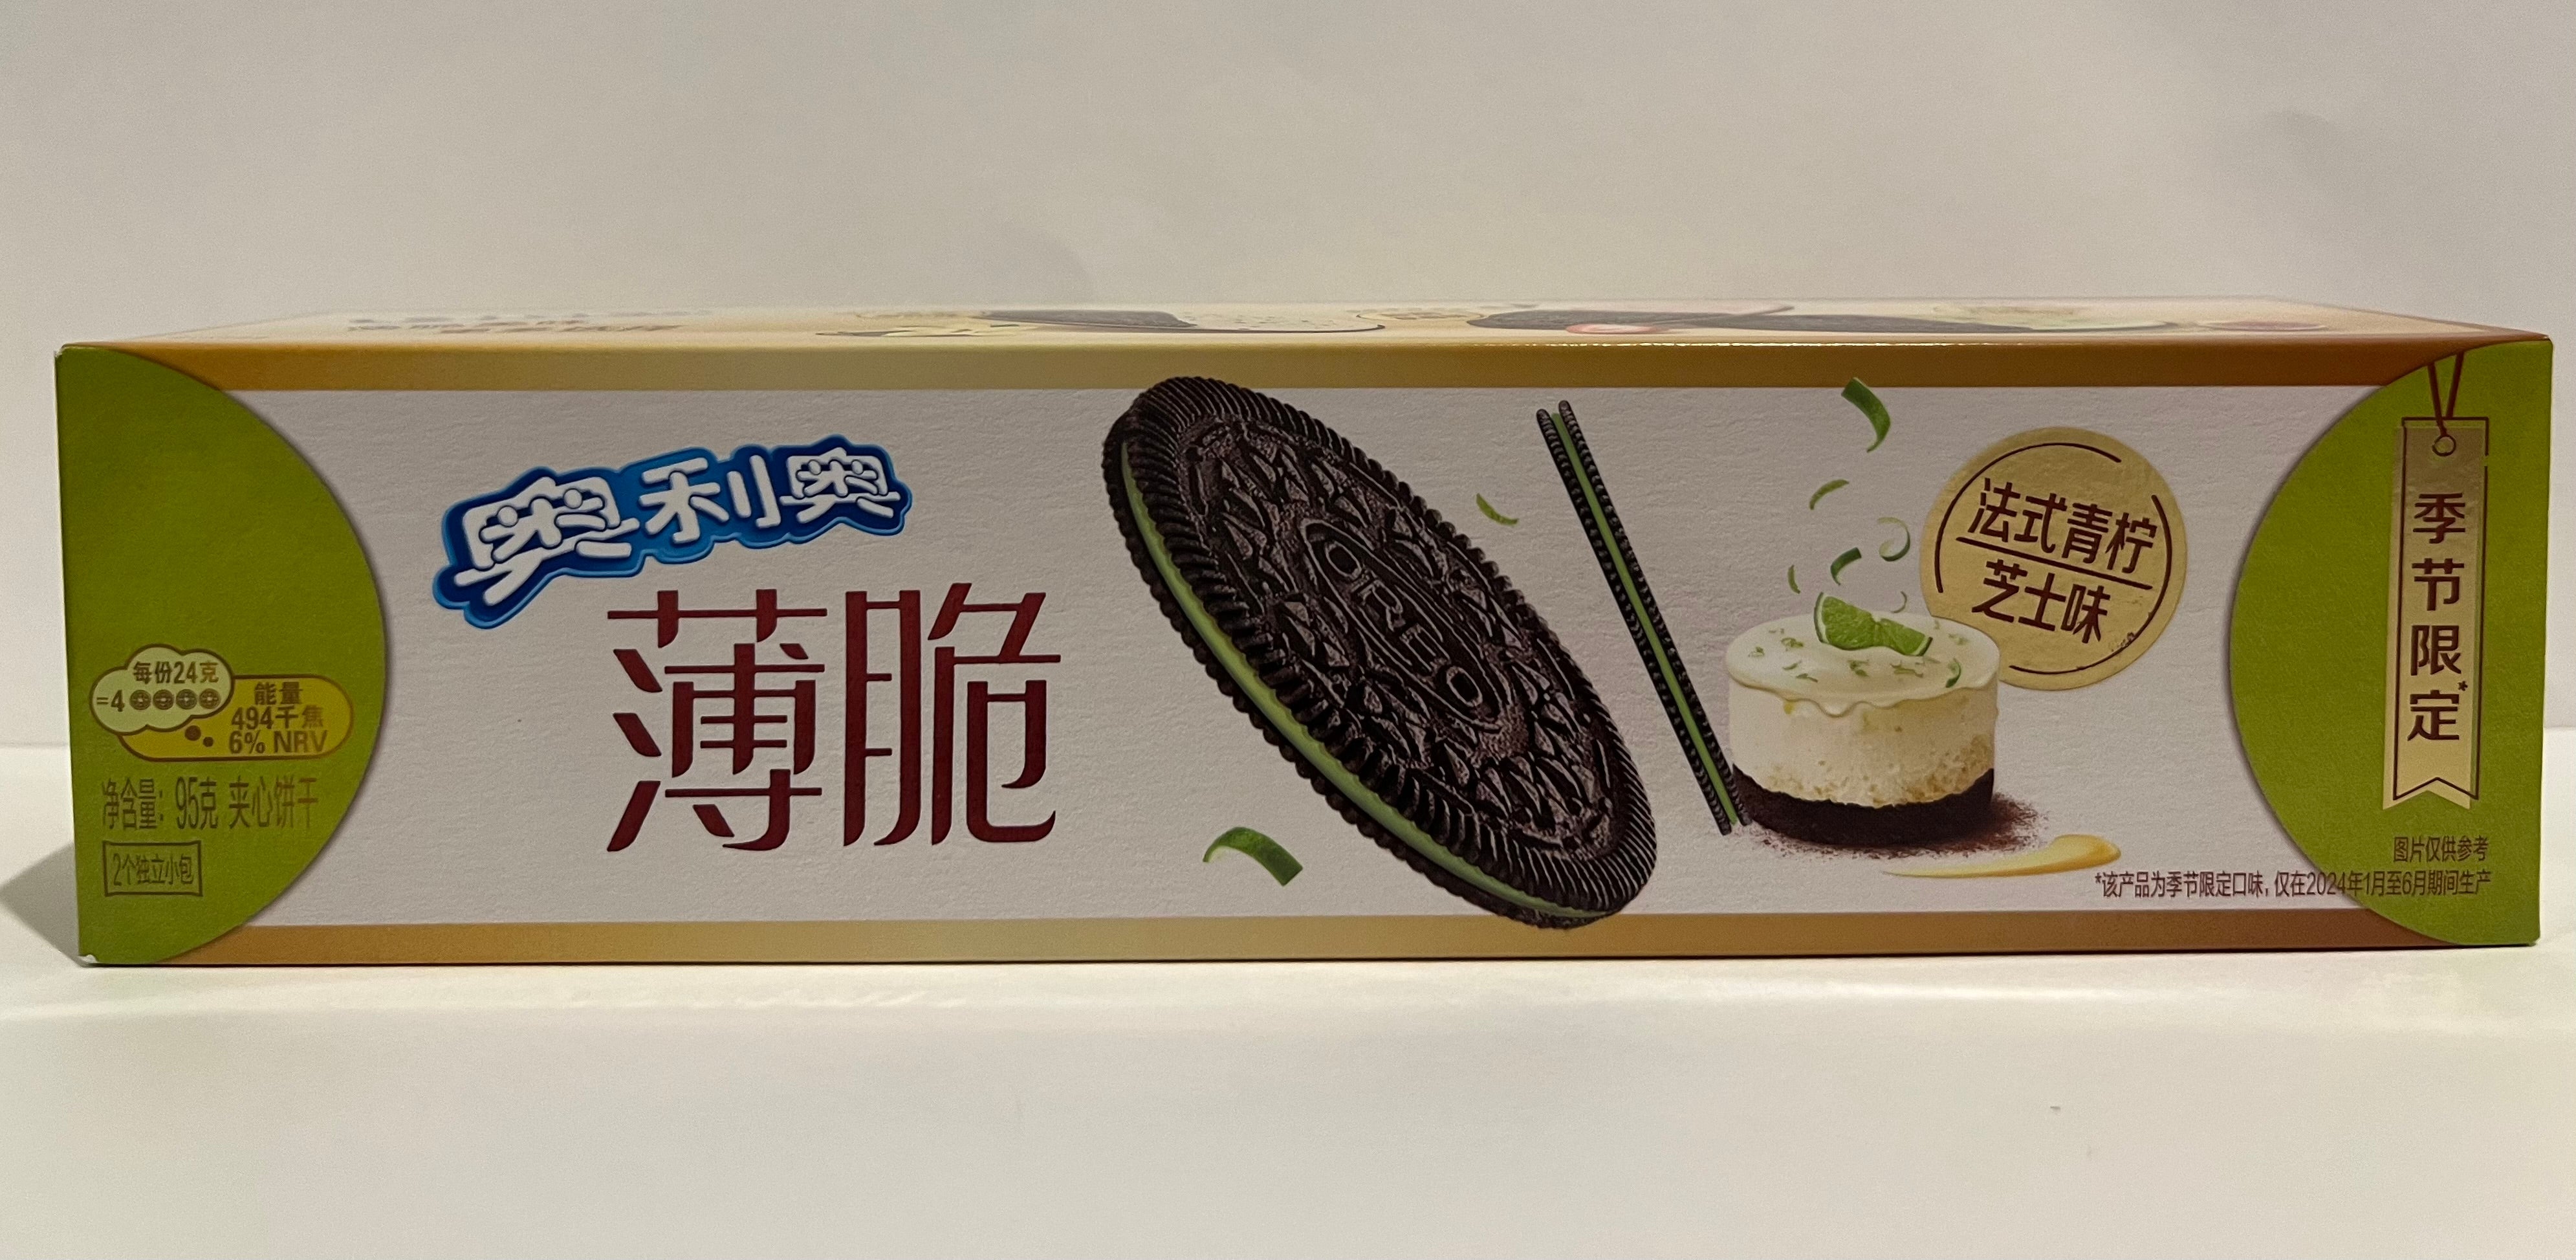 Oreo crisp French lime cheese flavor